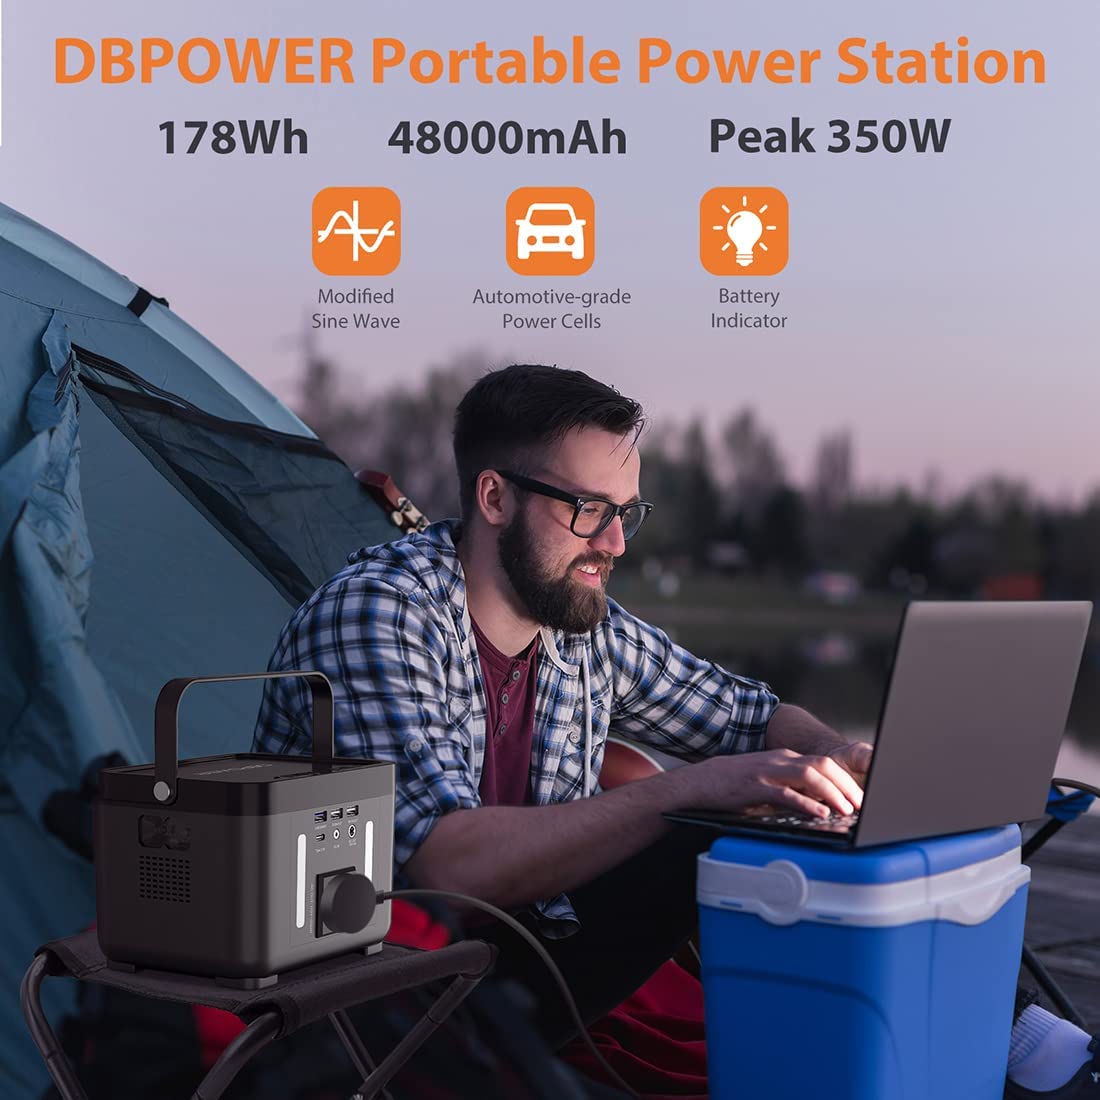 DBPOWER, DBPOWER PW0001 178Wh/250W Battery Backup with AC Outlet Portable Power Station New